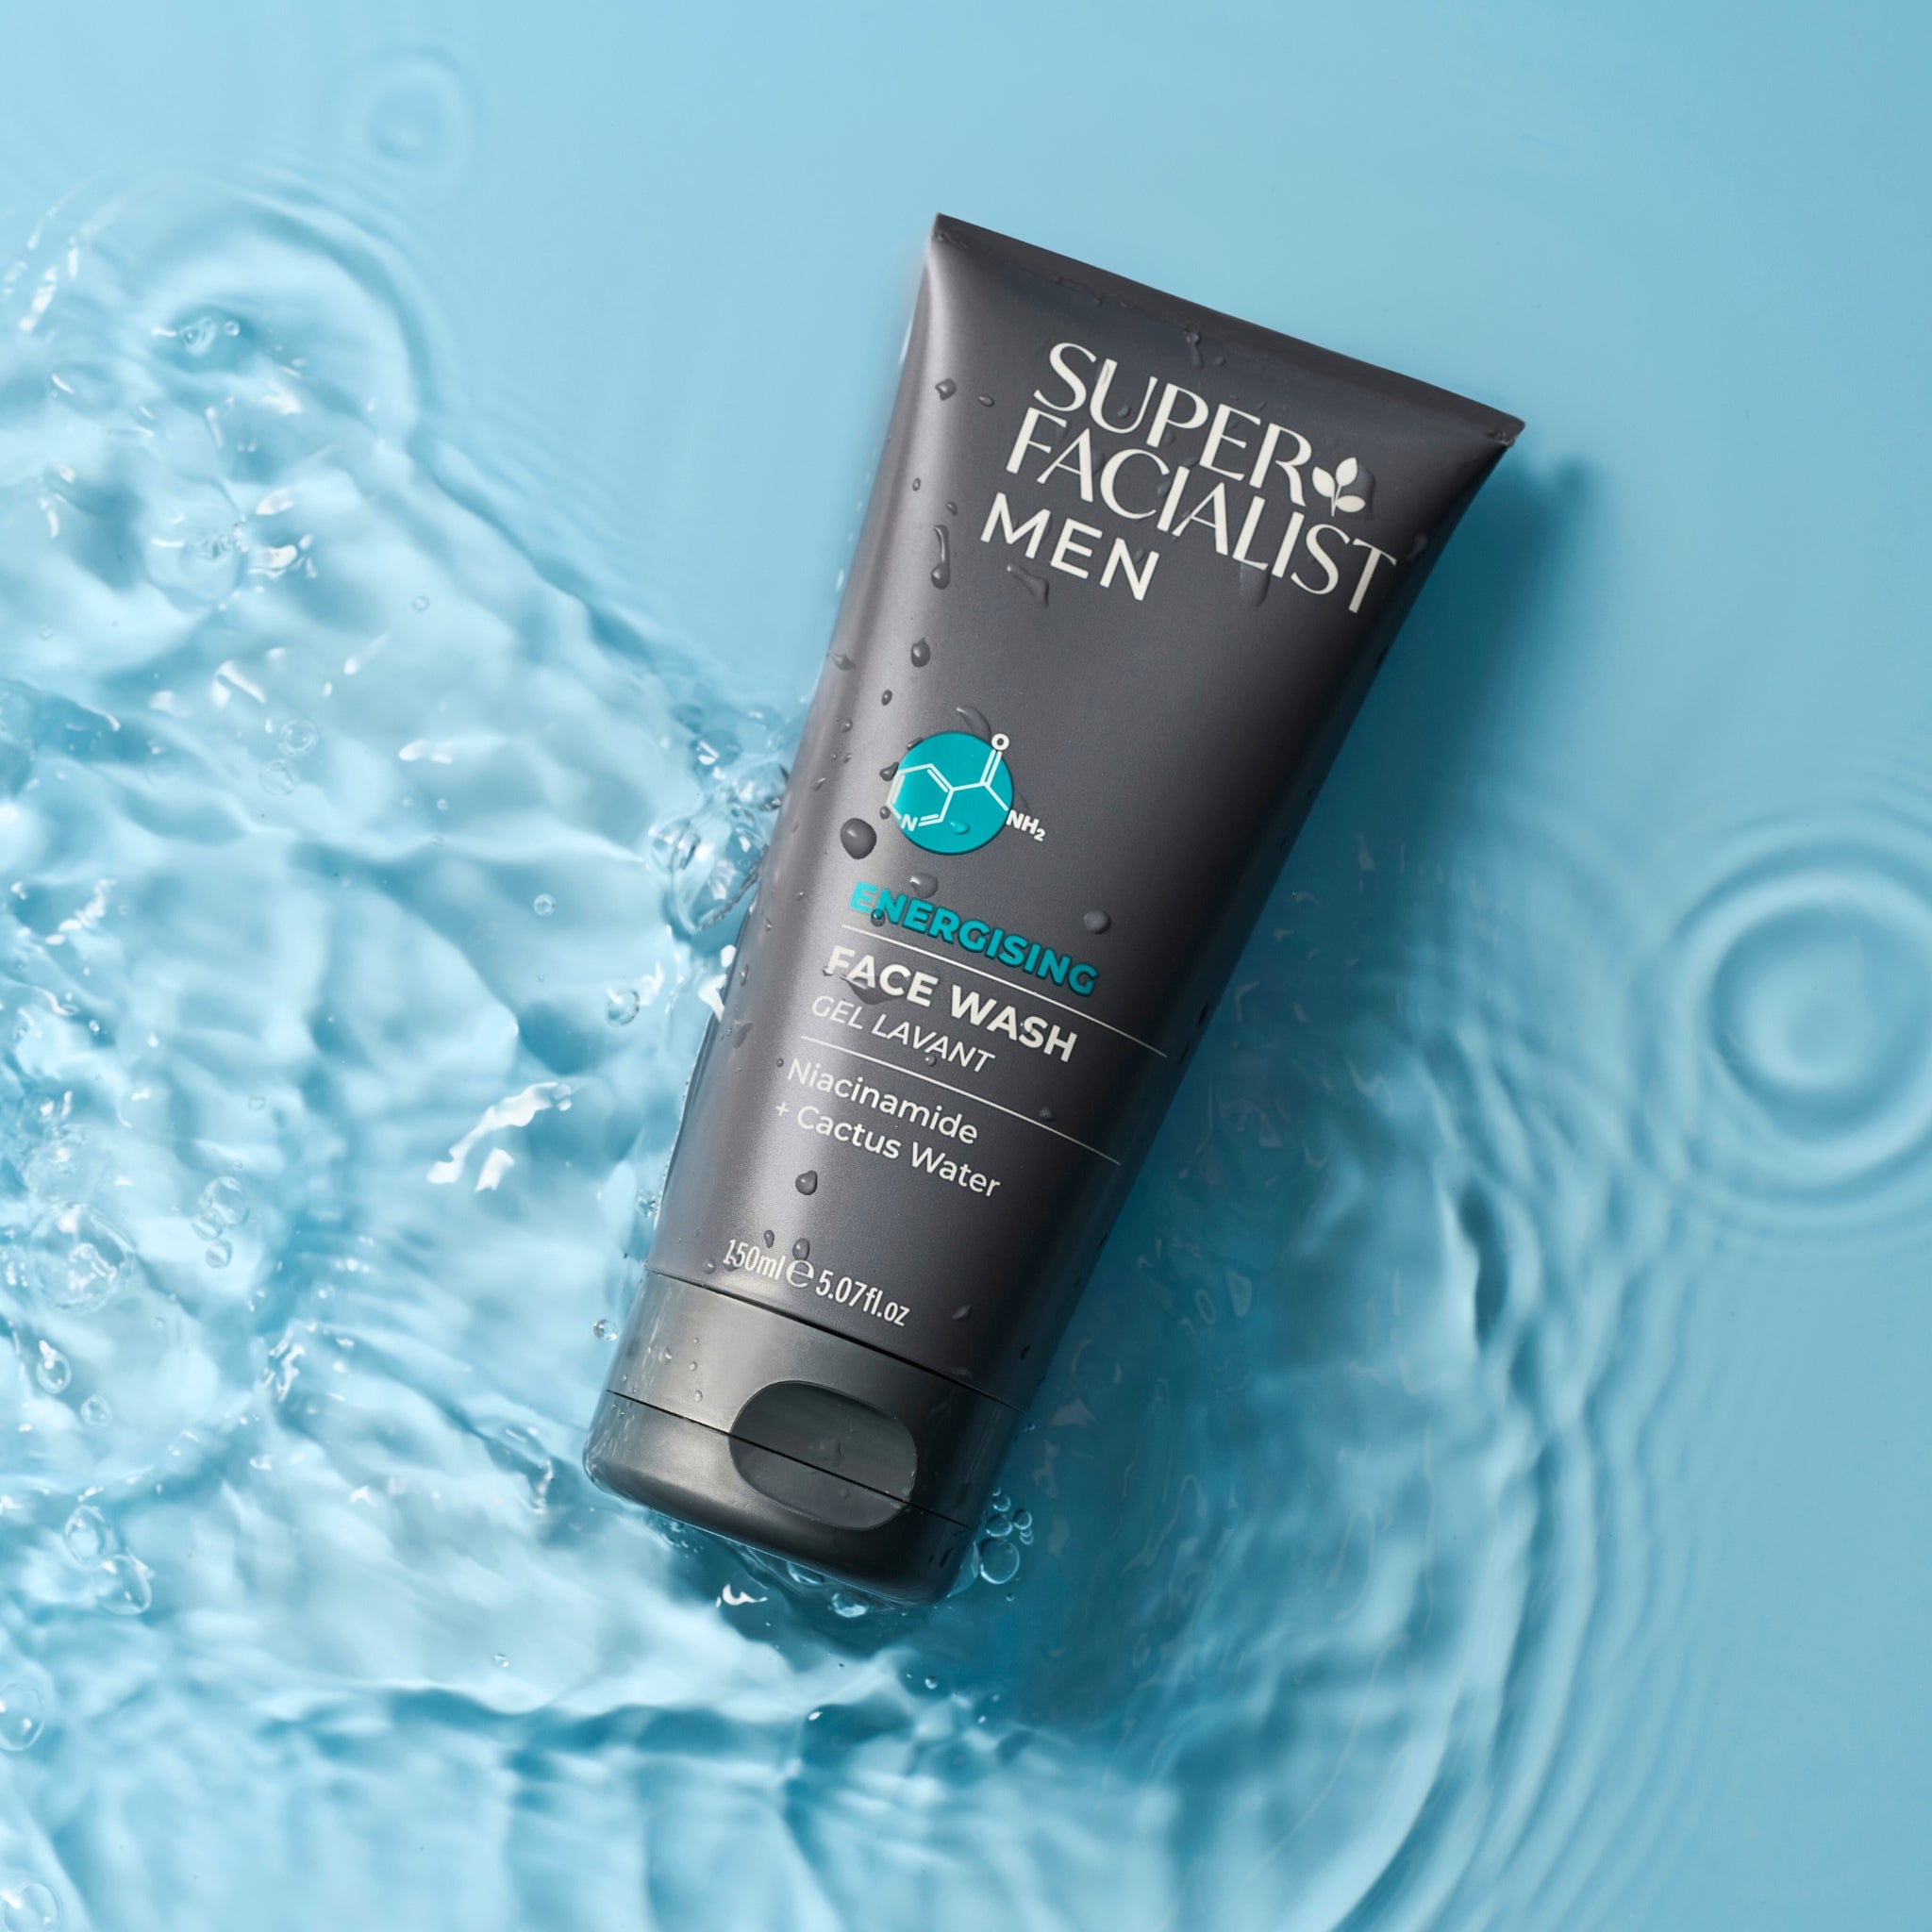 Energising Face Wash for Men product in water